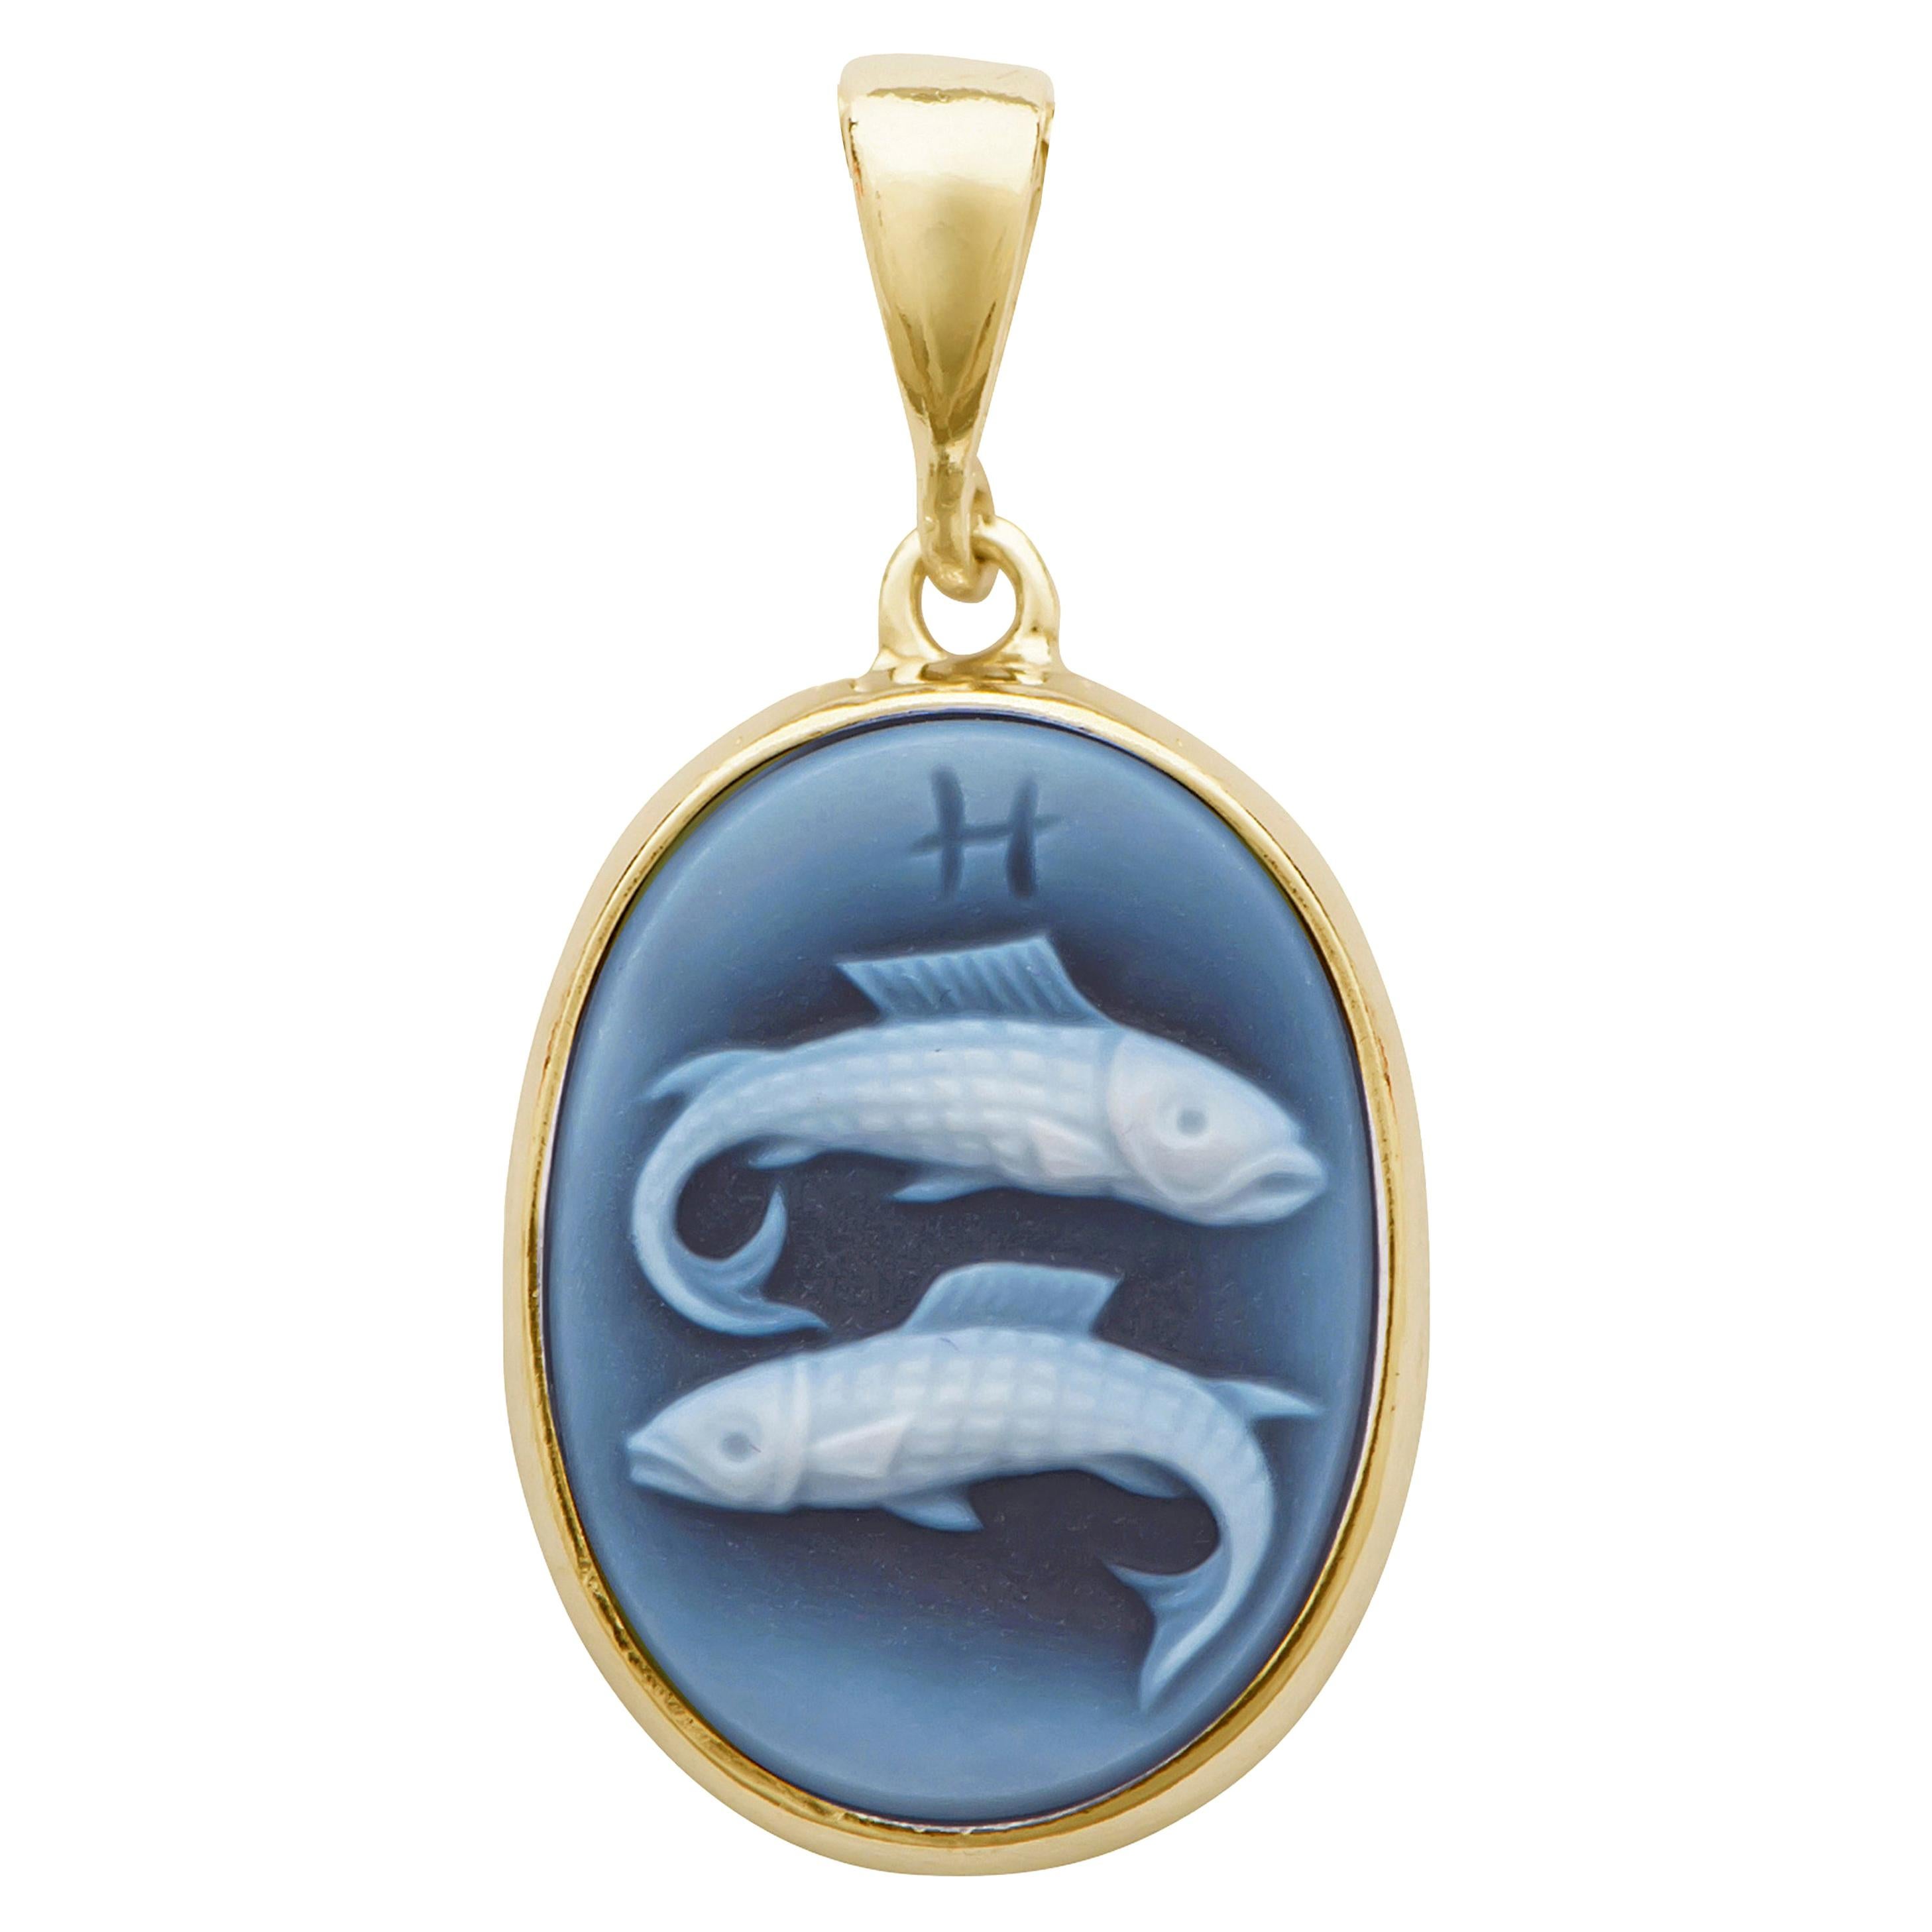 Hand-Carved Pisces Zodiac Agate Cameo 925 Sterling Silver Pendant Necklace